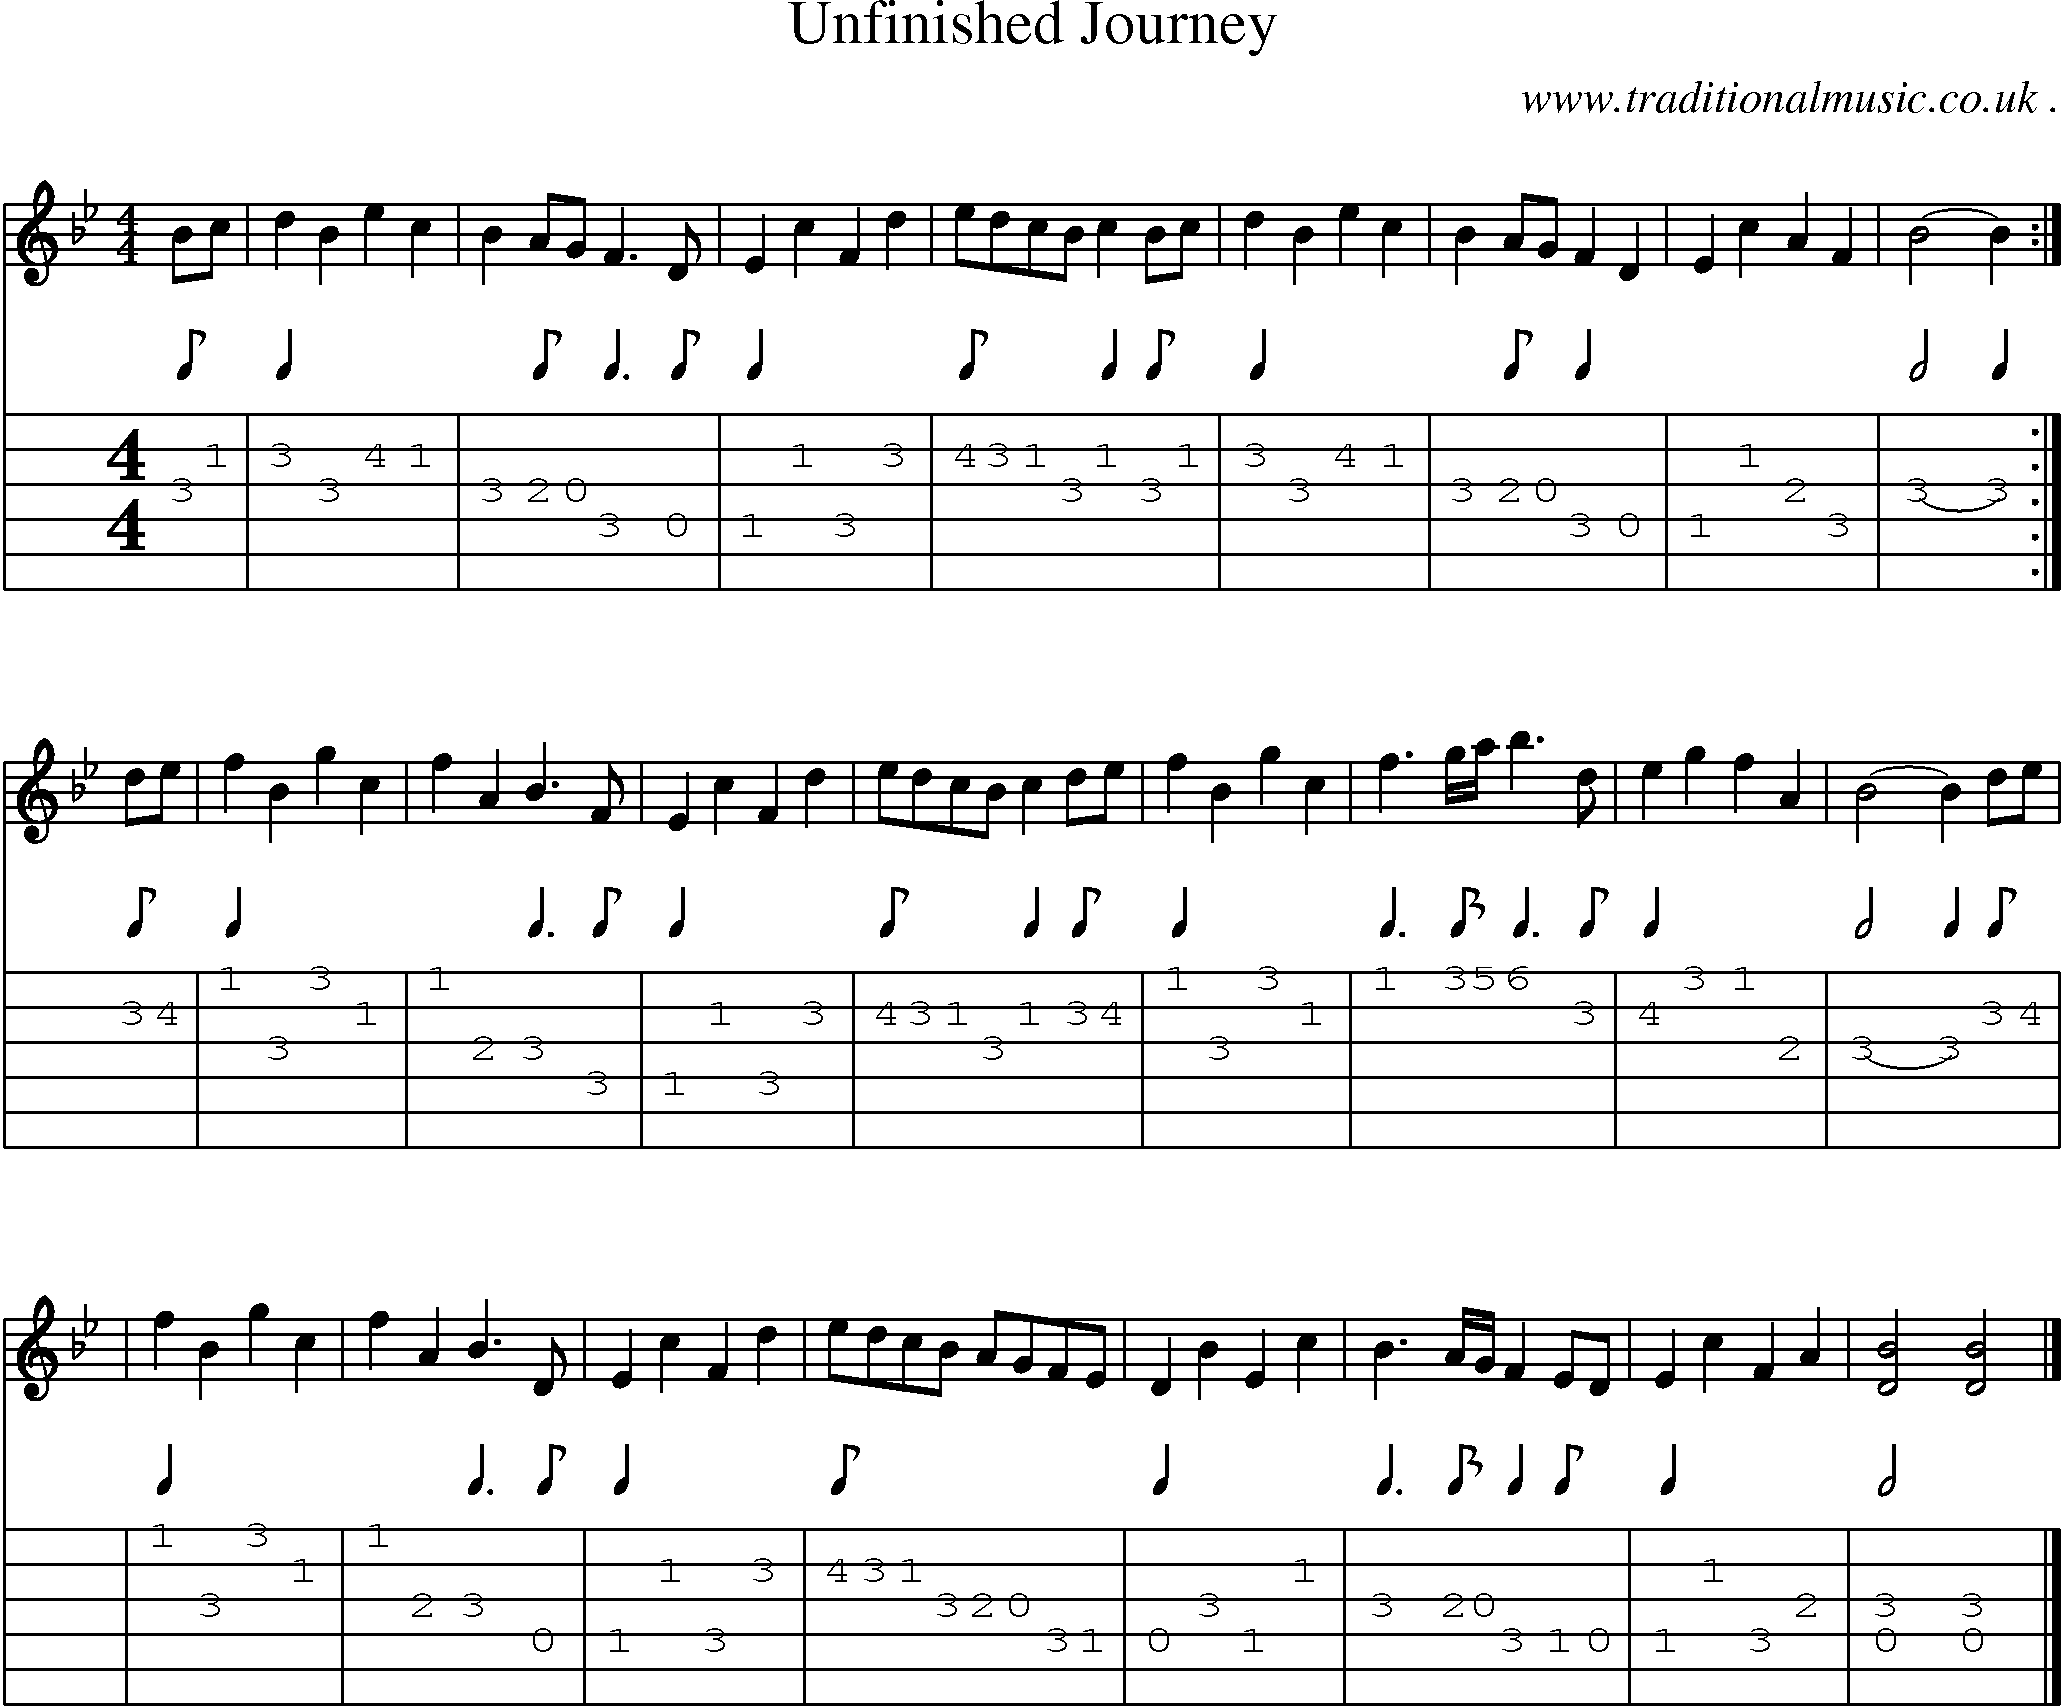 Sheet-music  score, Chords and Guitar Tabs for Unfinished Journey